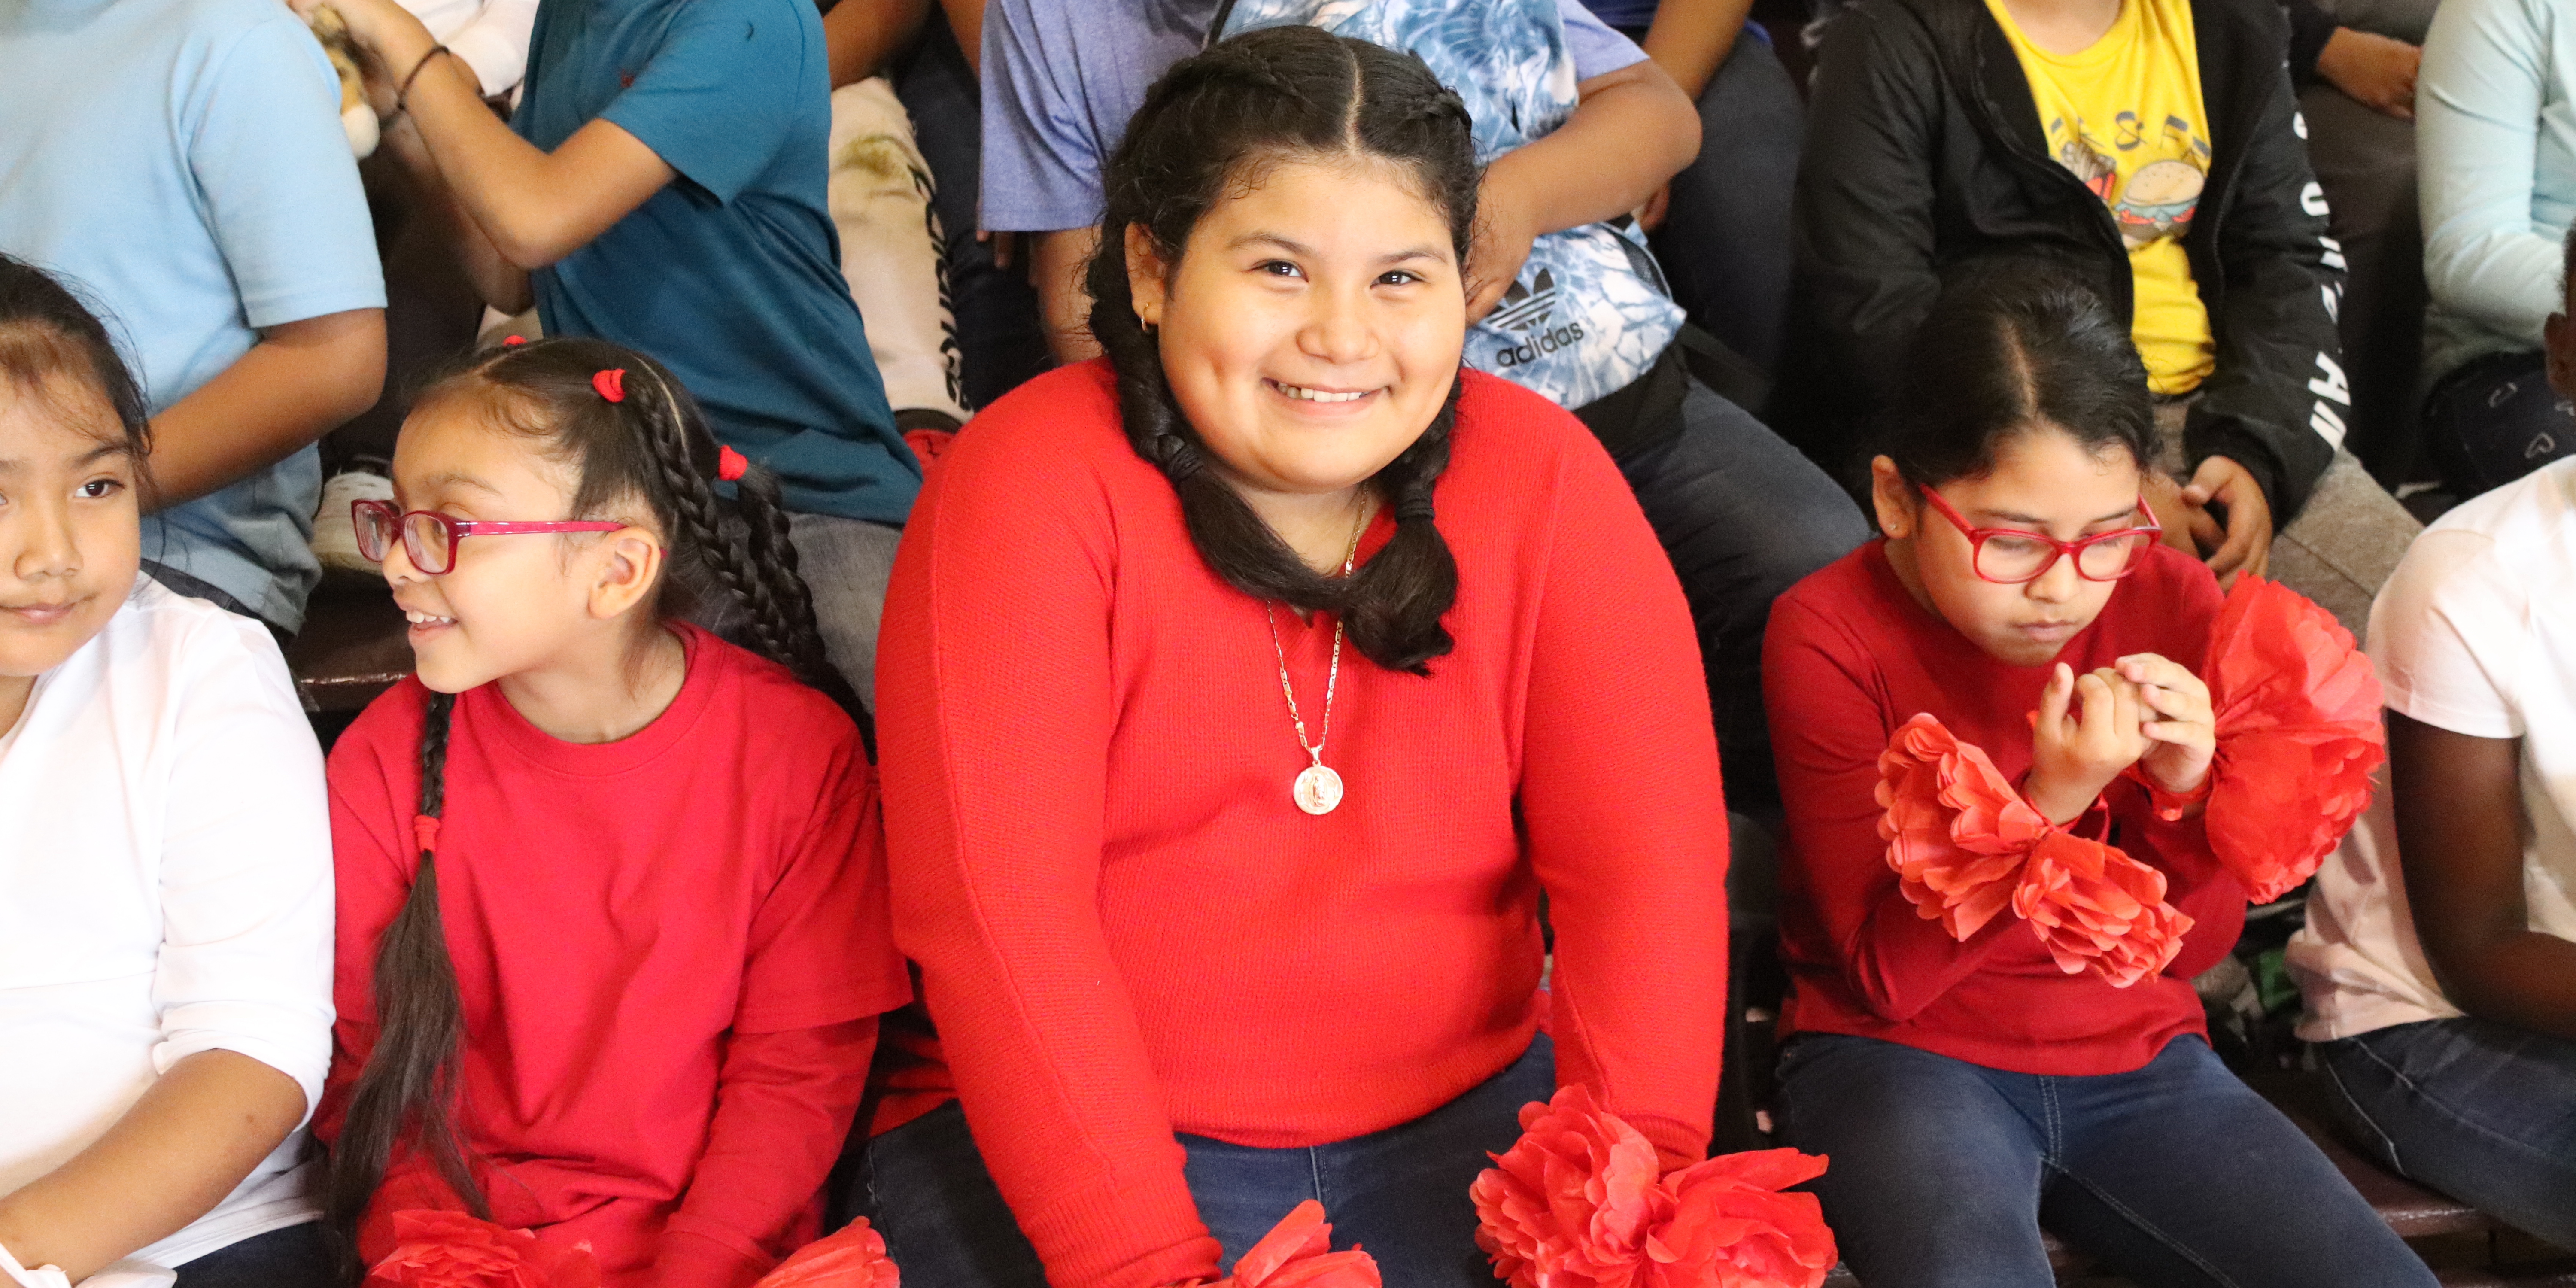 A crowd of elementary students sit on bleachers. One girl dressed in a bright red shirt smiles. 